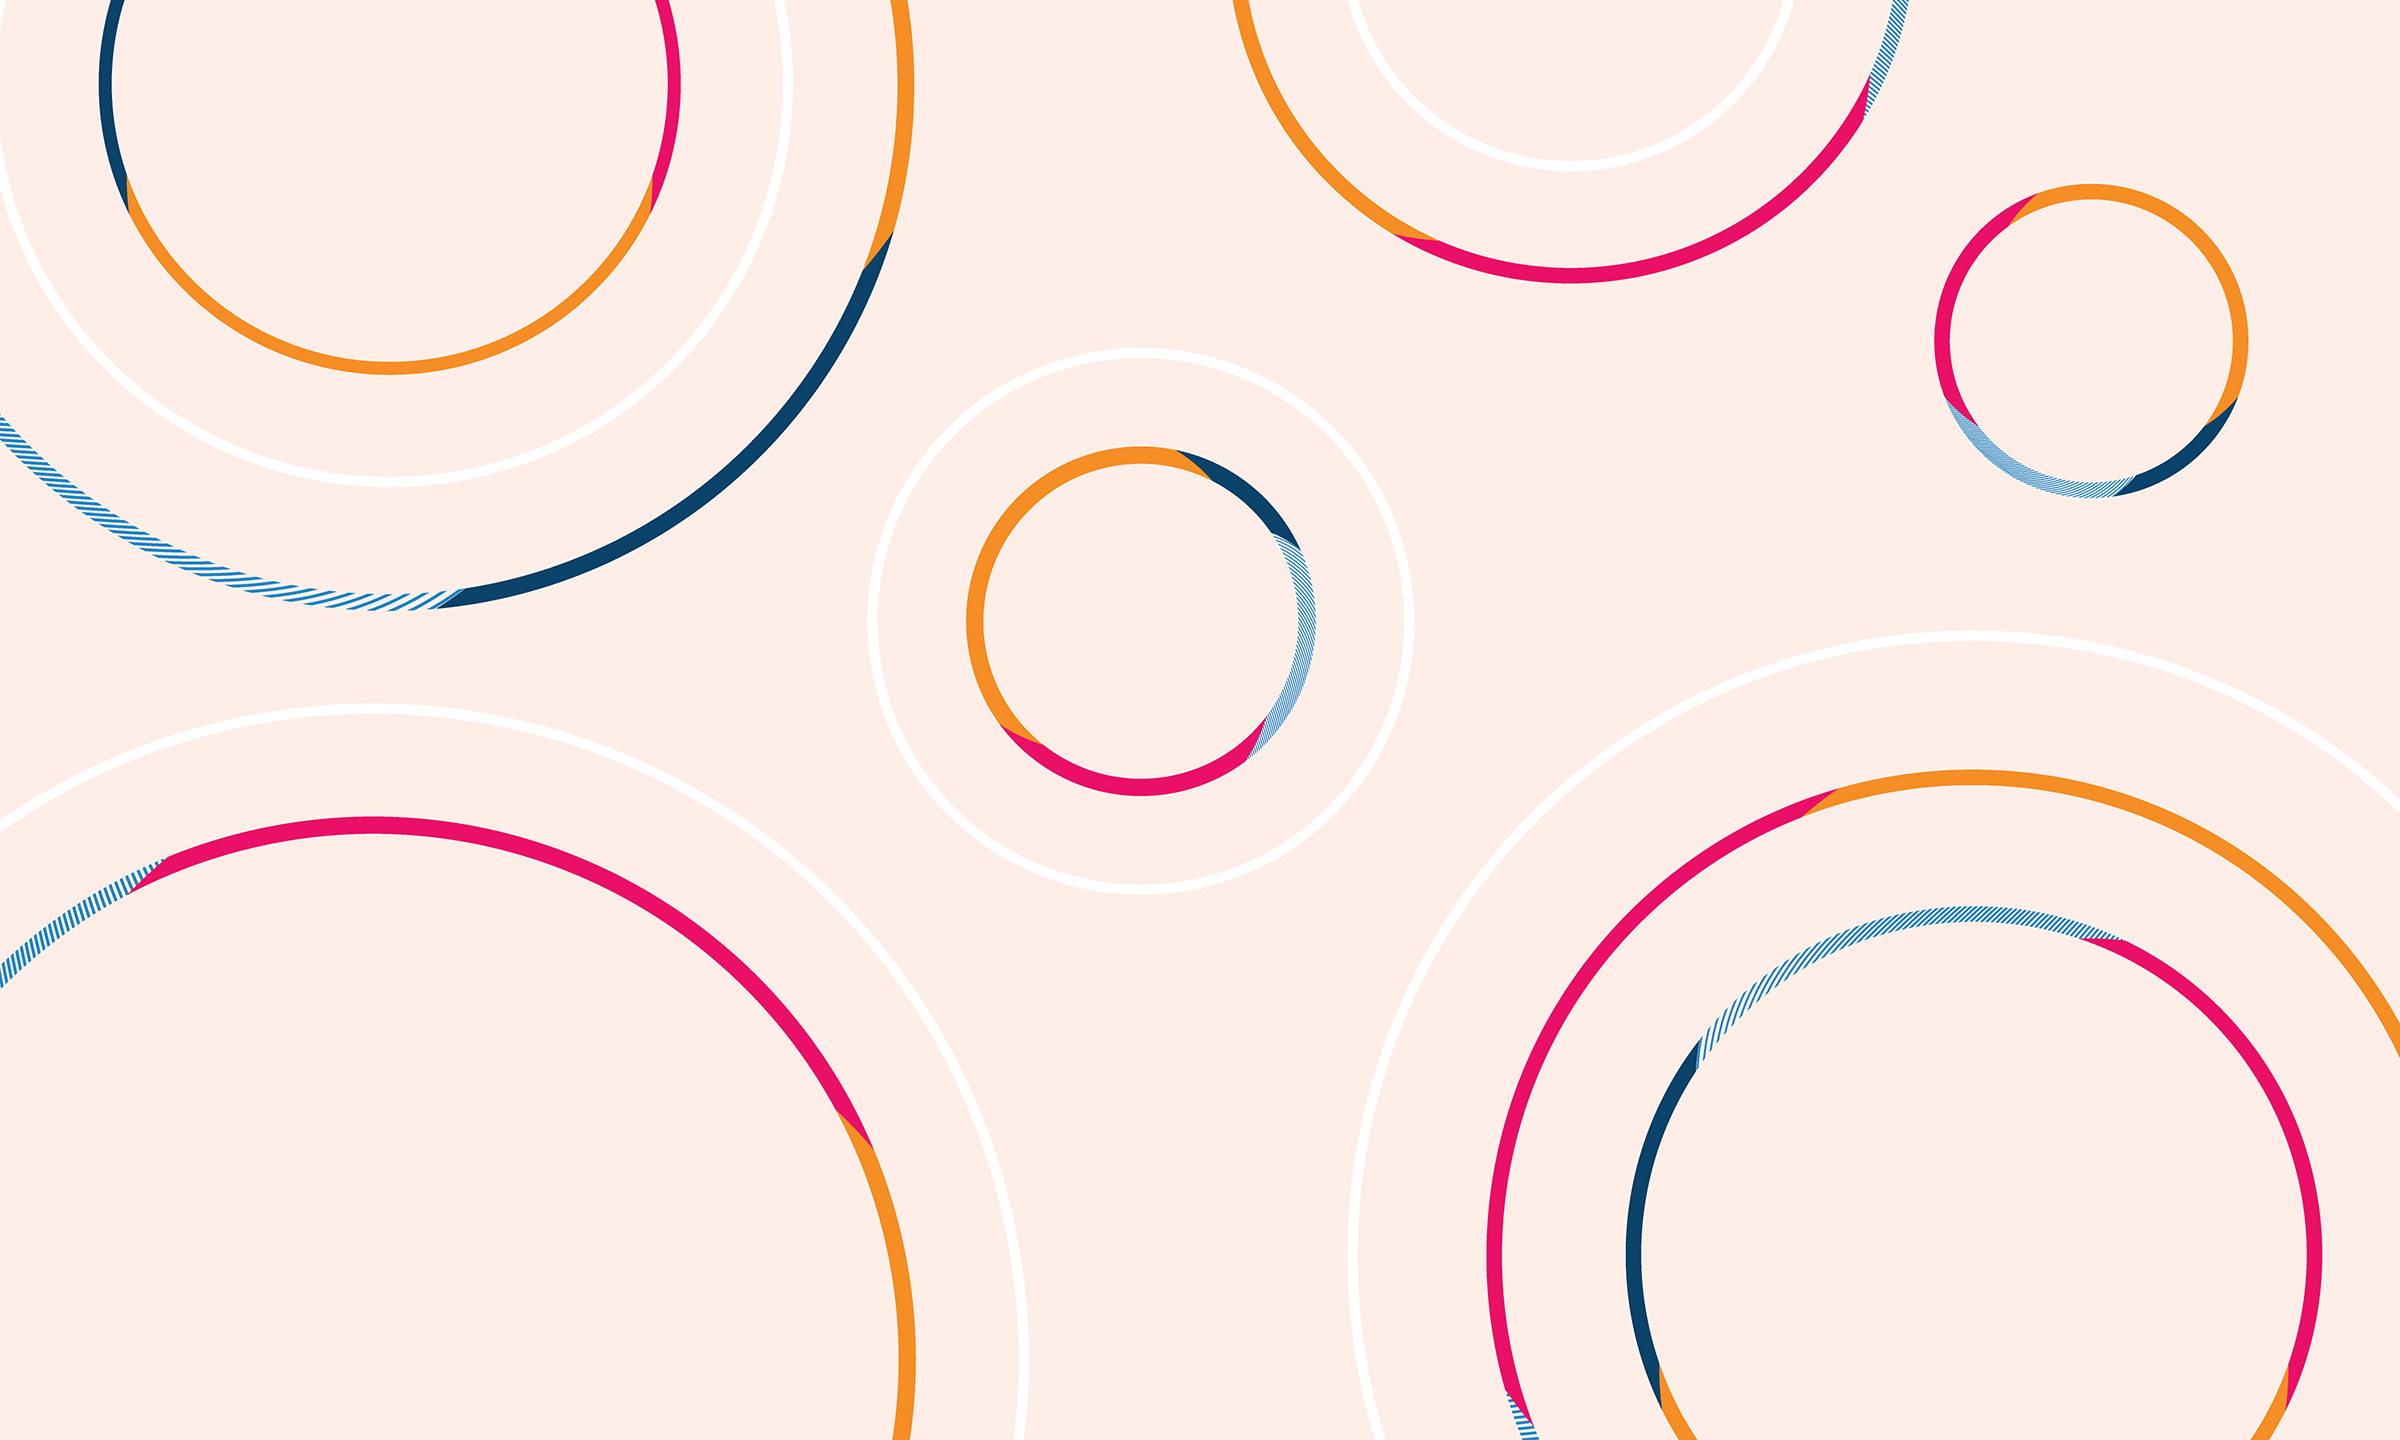 Concentric circles in CoverMyMeds brand colors of orange, magenta and blue